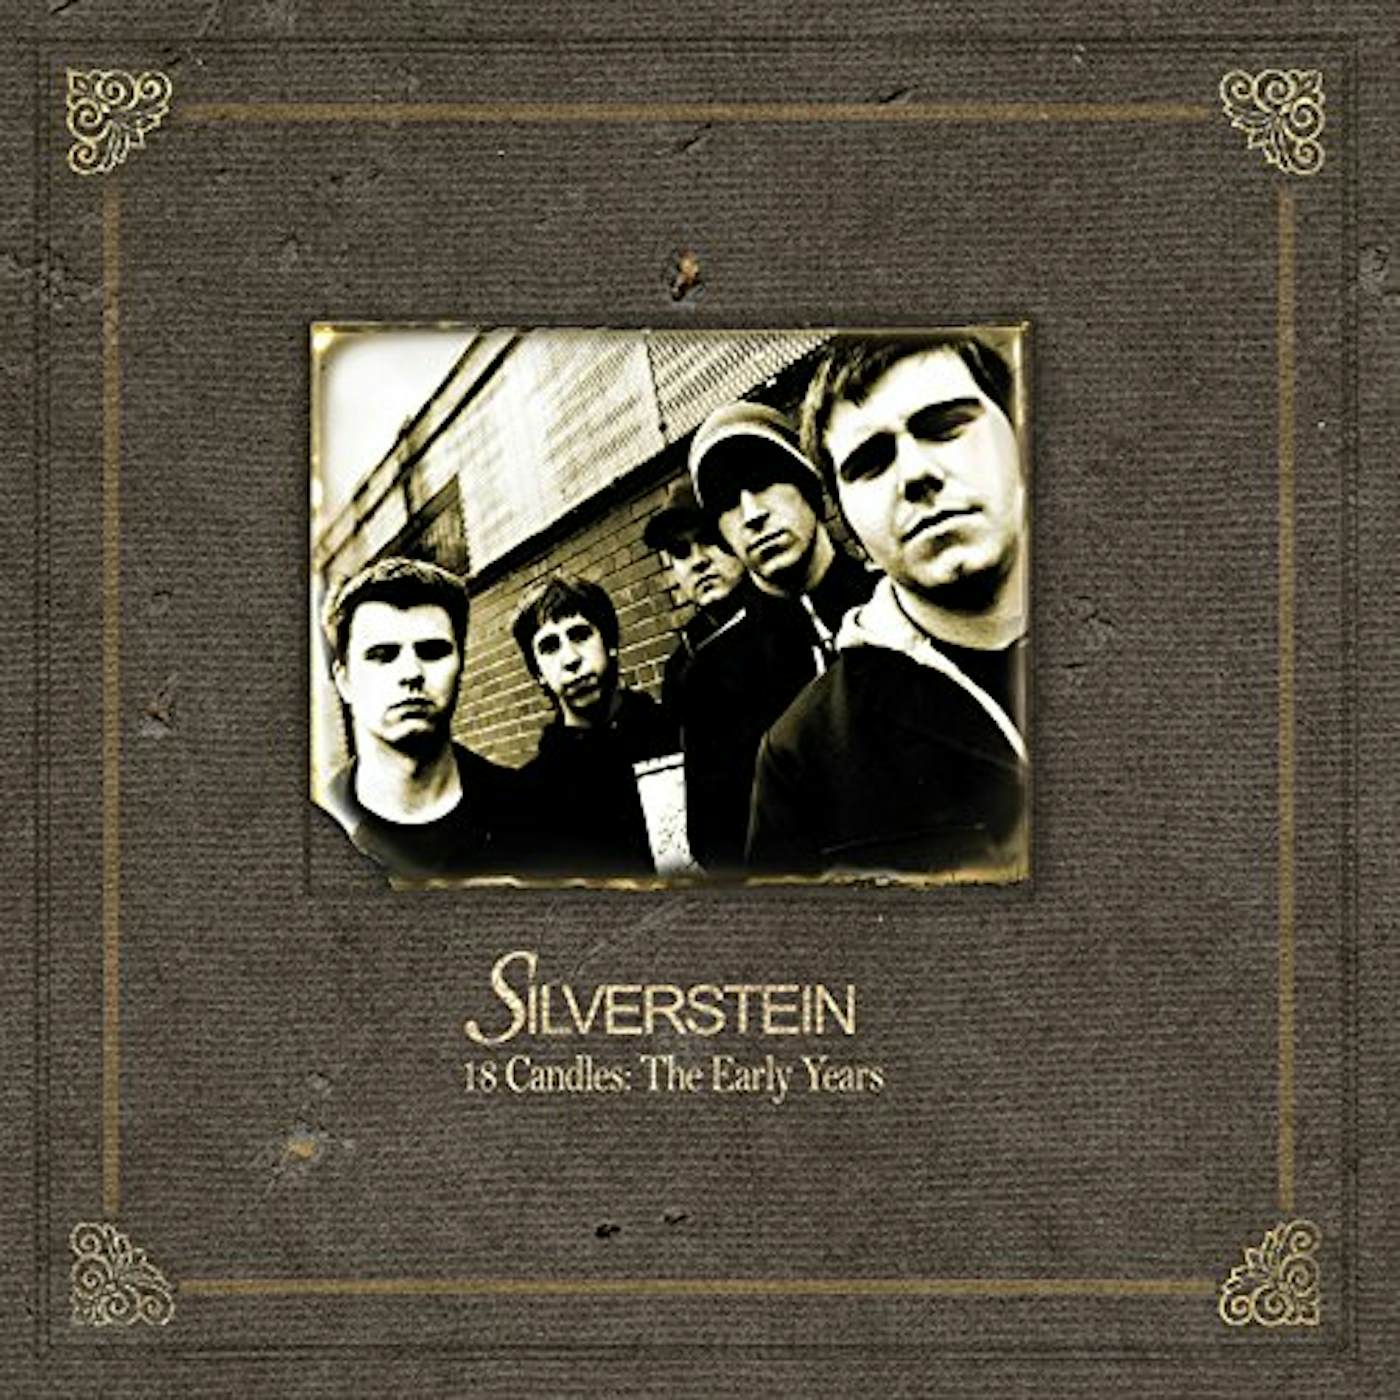 Silverstein 18 CANDLES THE EARLY YEARS WMT CD